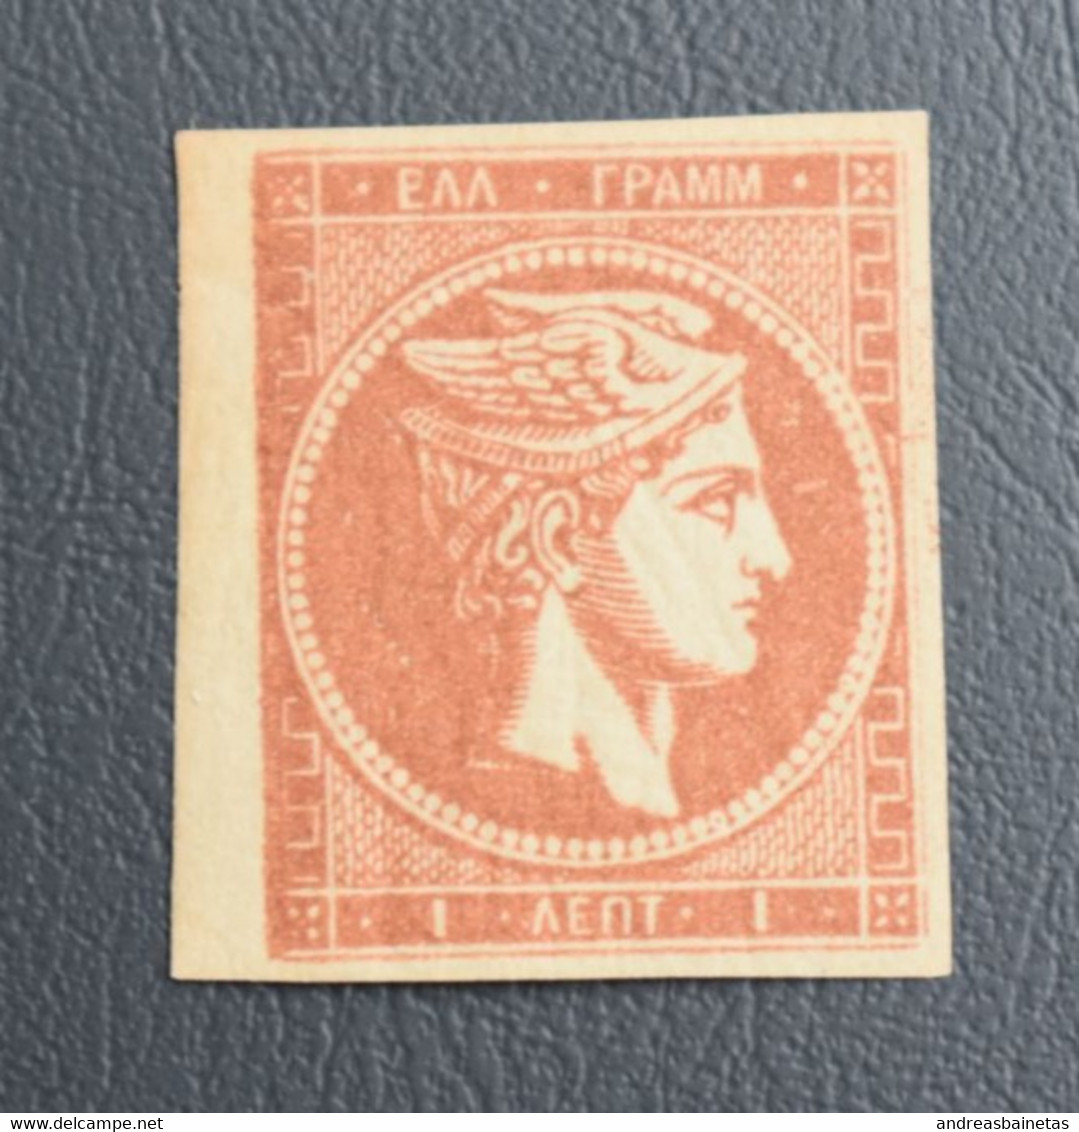 Stamps GREECE Large  Hermes Heads 1 Lepton LH  1880-1886 - Nuevos